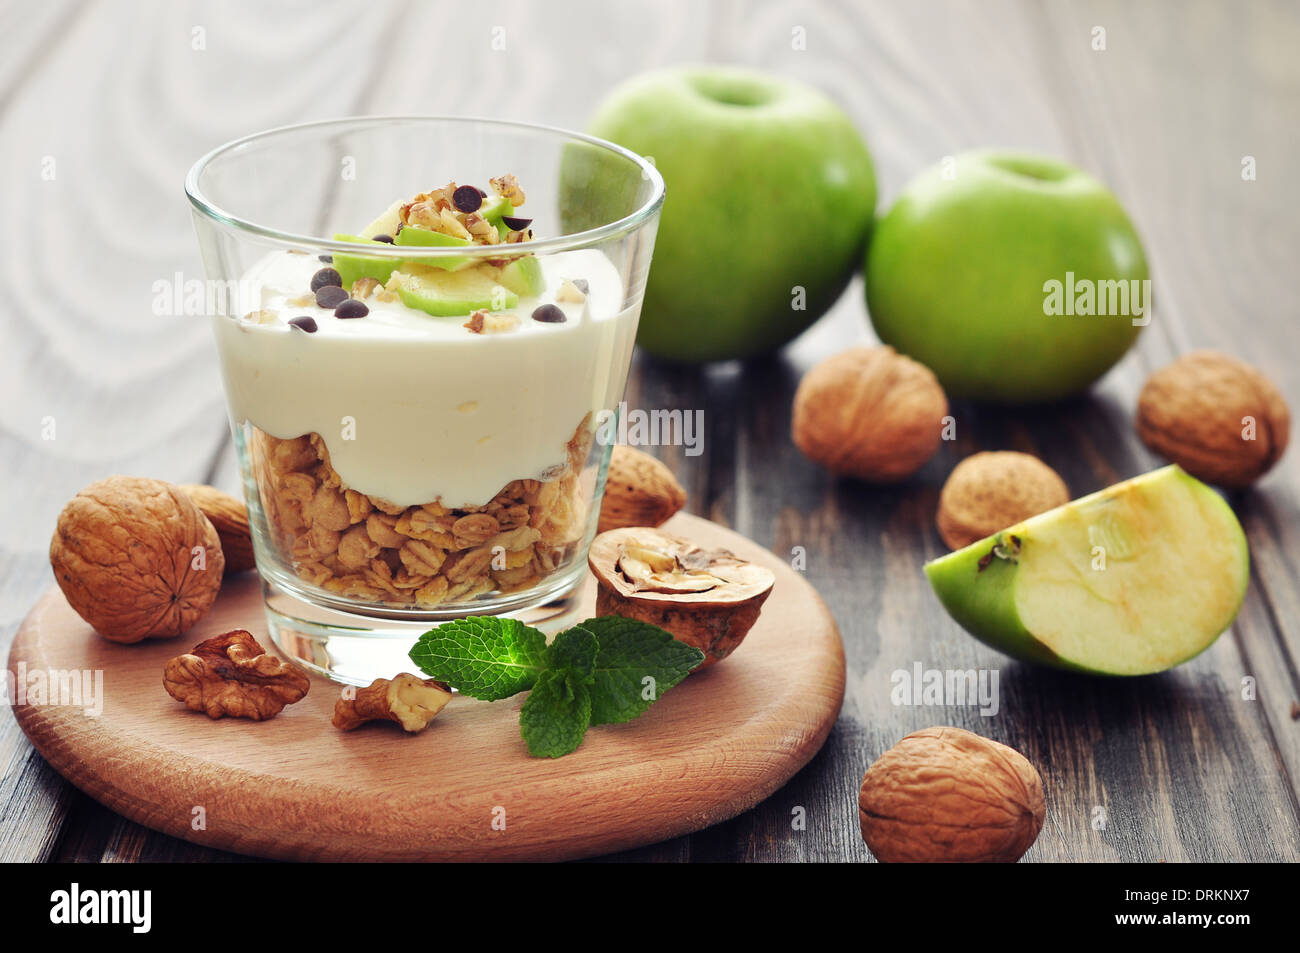 Homemade dessert with apple, nuts, yogurt and granola in glasses Stock Photo